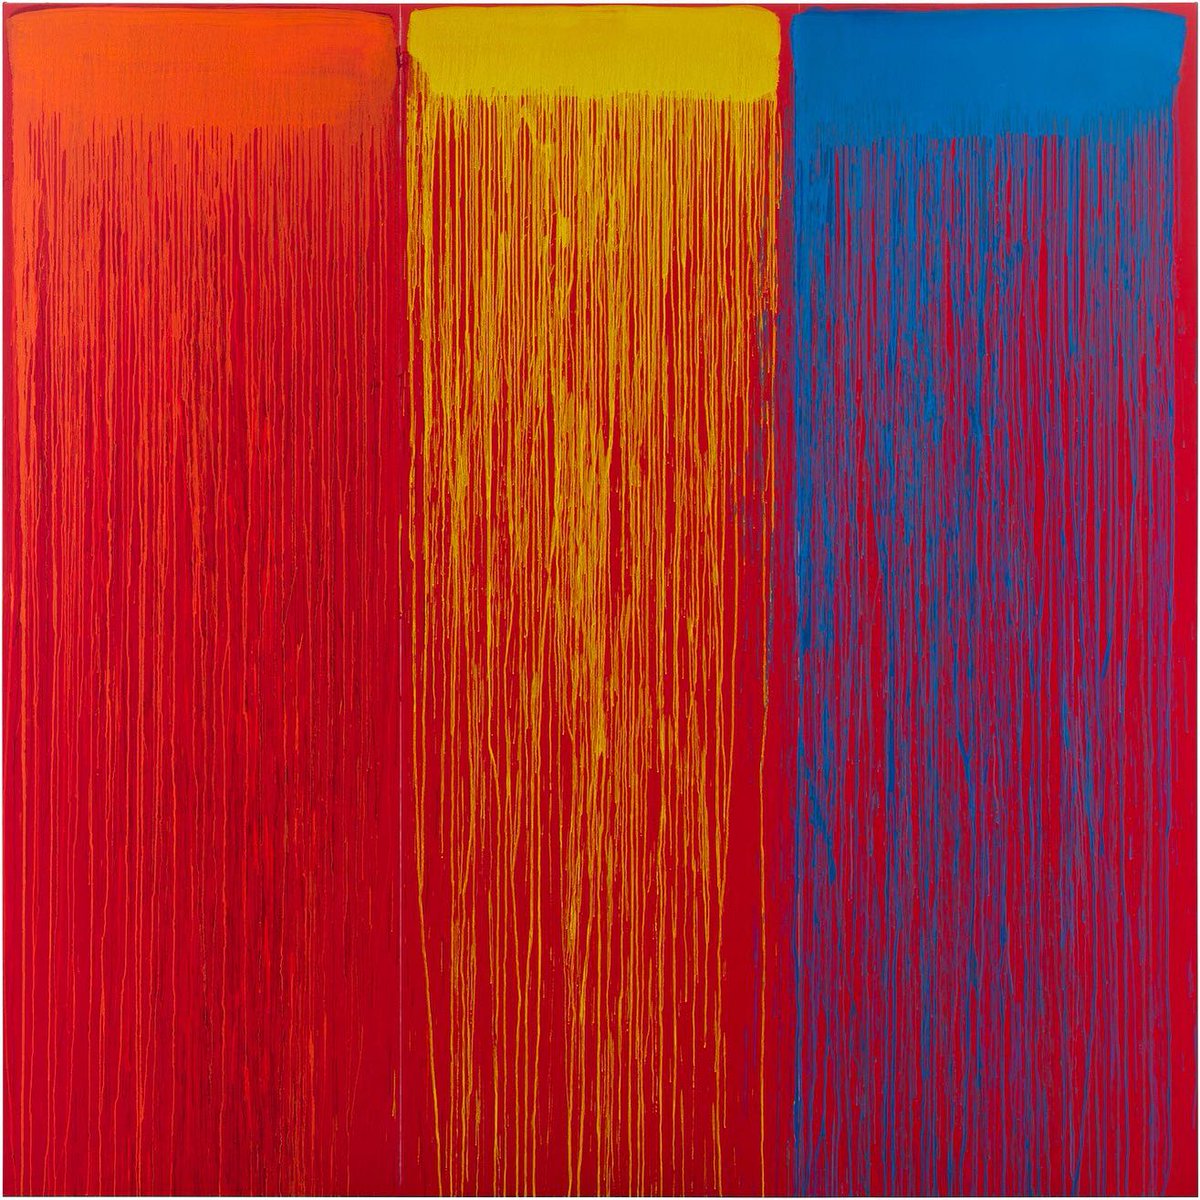 #patsteir is best known for her abstract dripped waterfall paintings. In more recent years, she has added dynamic colors to her palette.